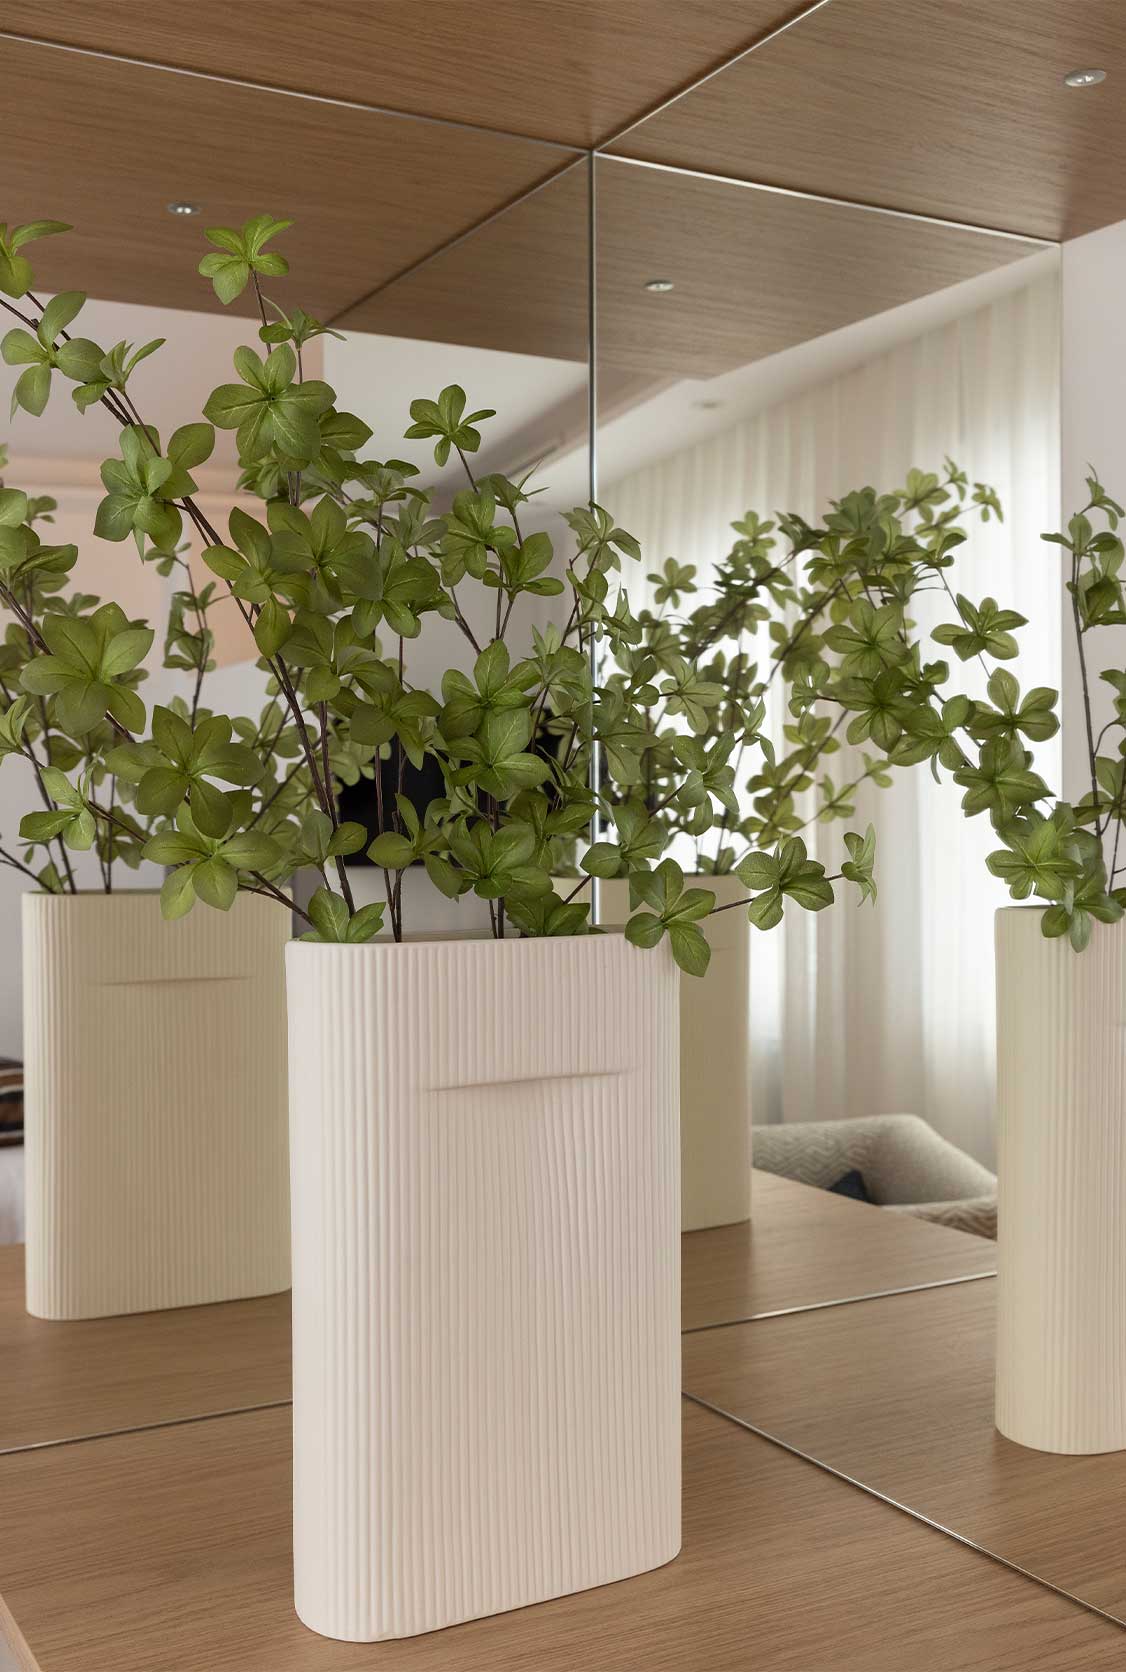 Home decorated with indoor plants